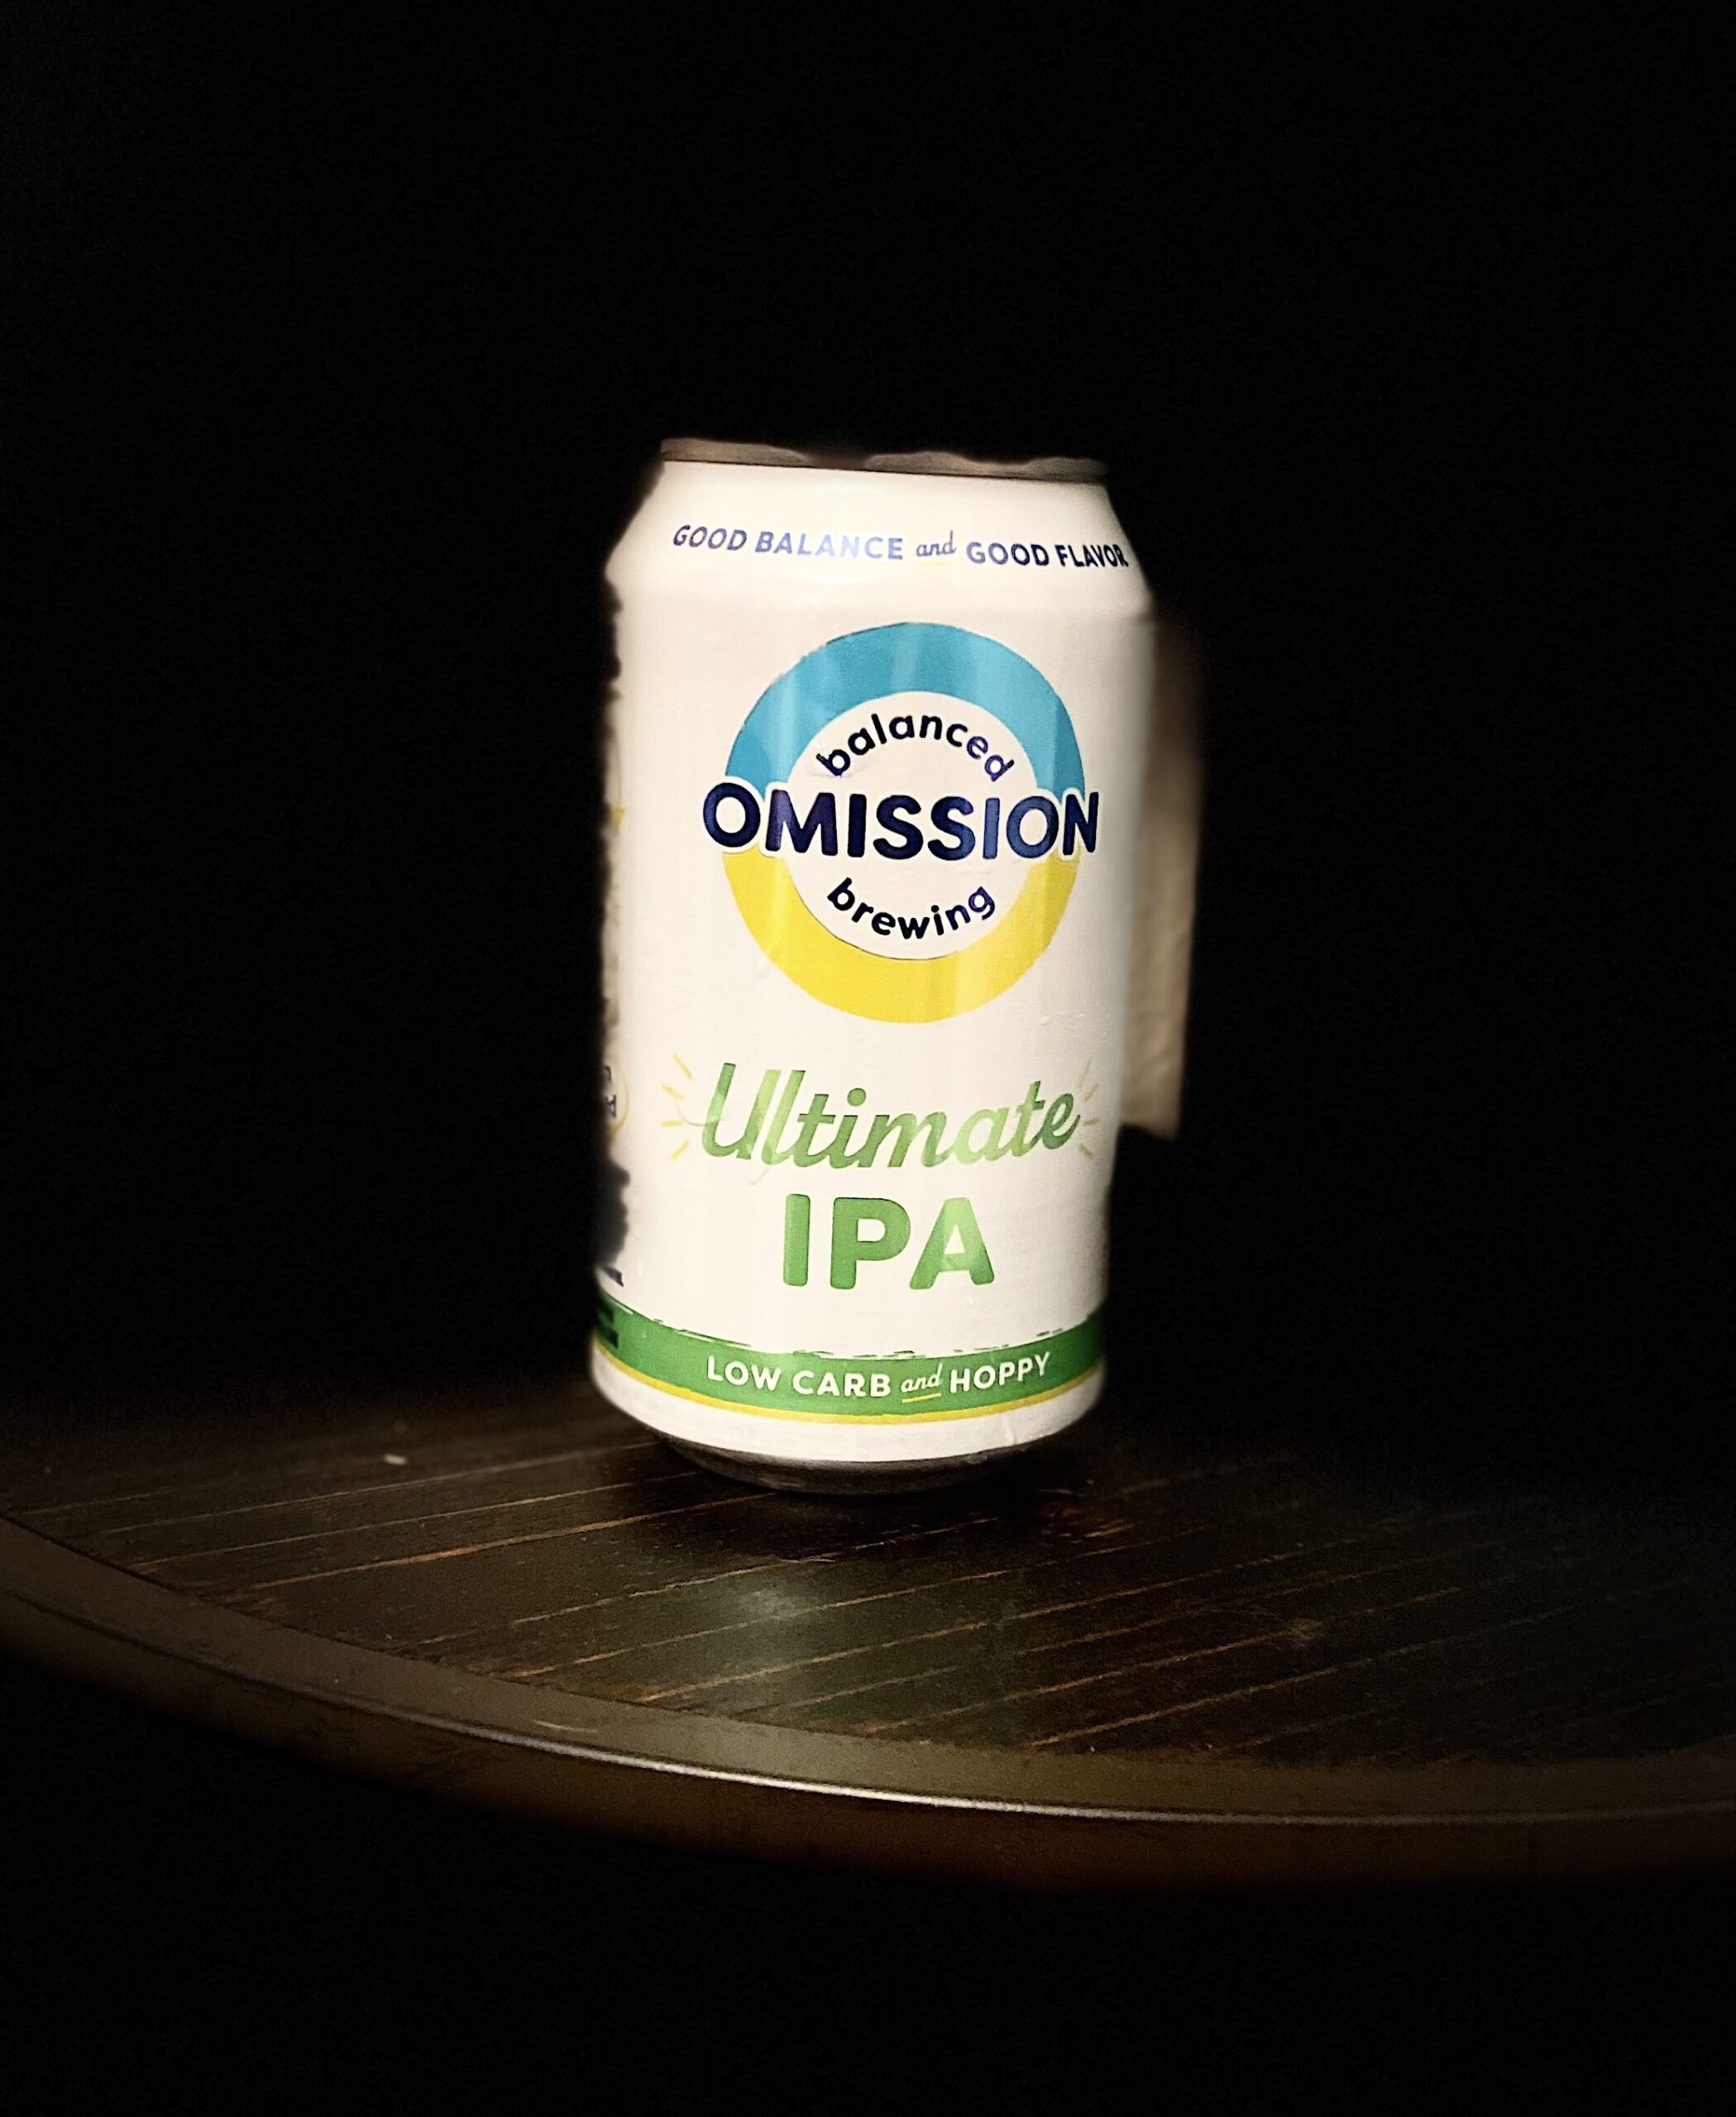 Omission IPA gluten reduced